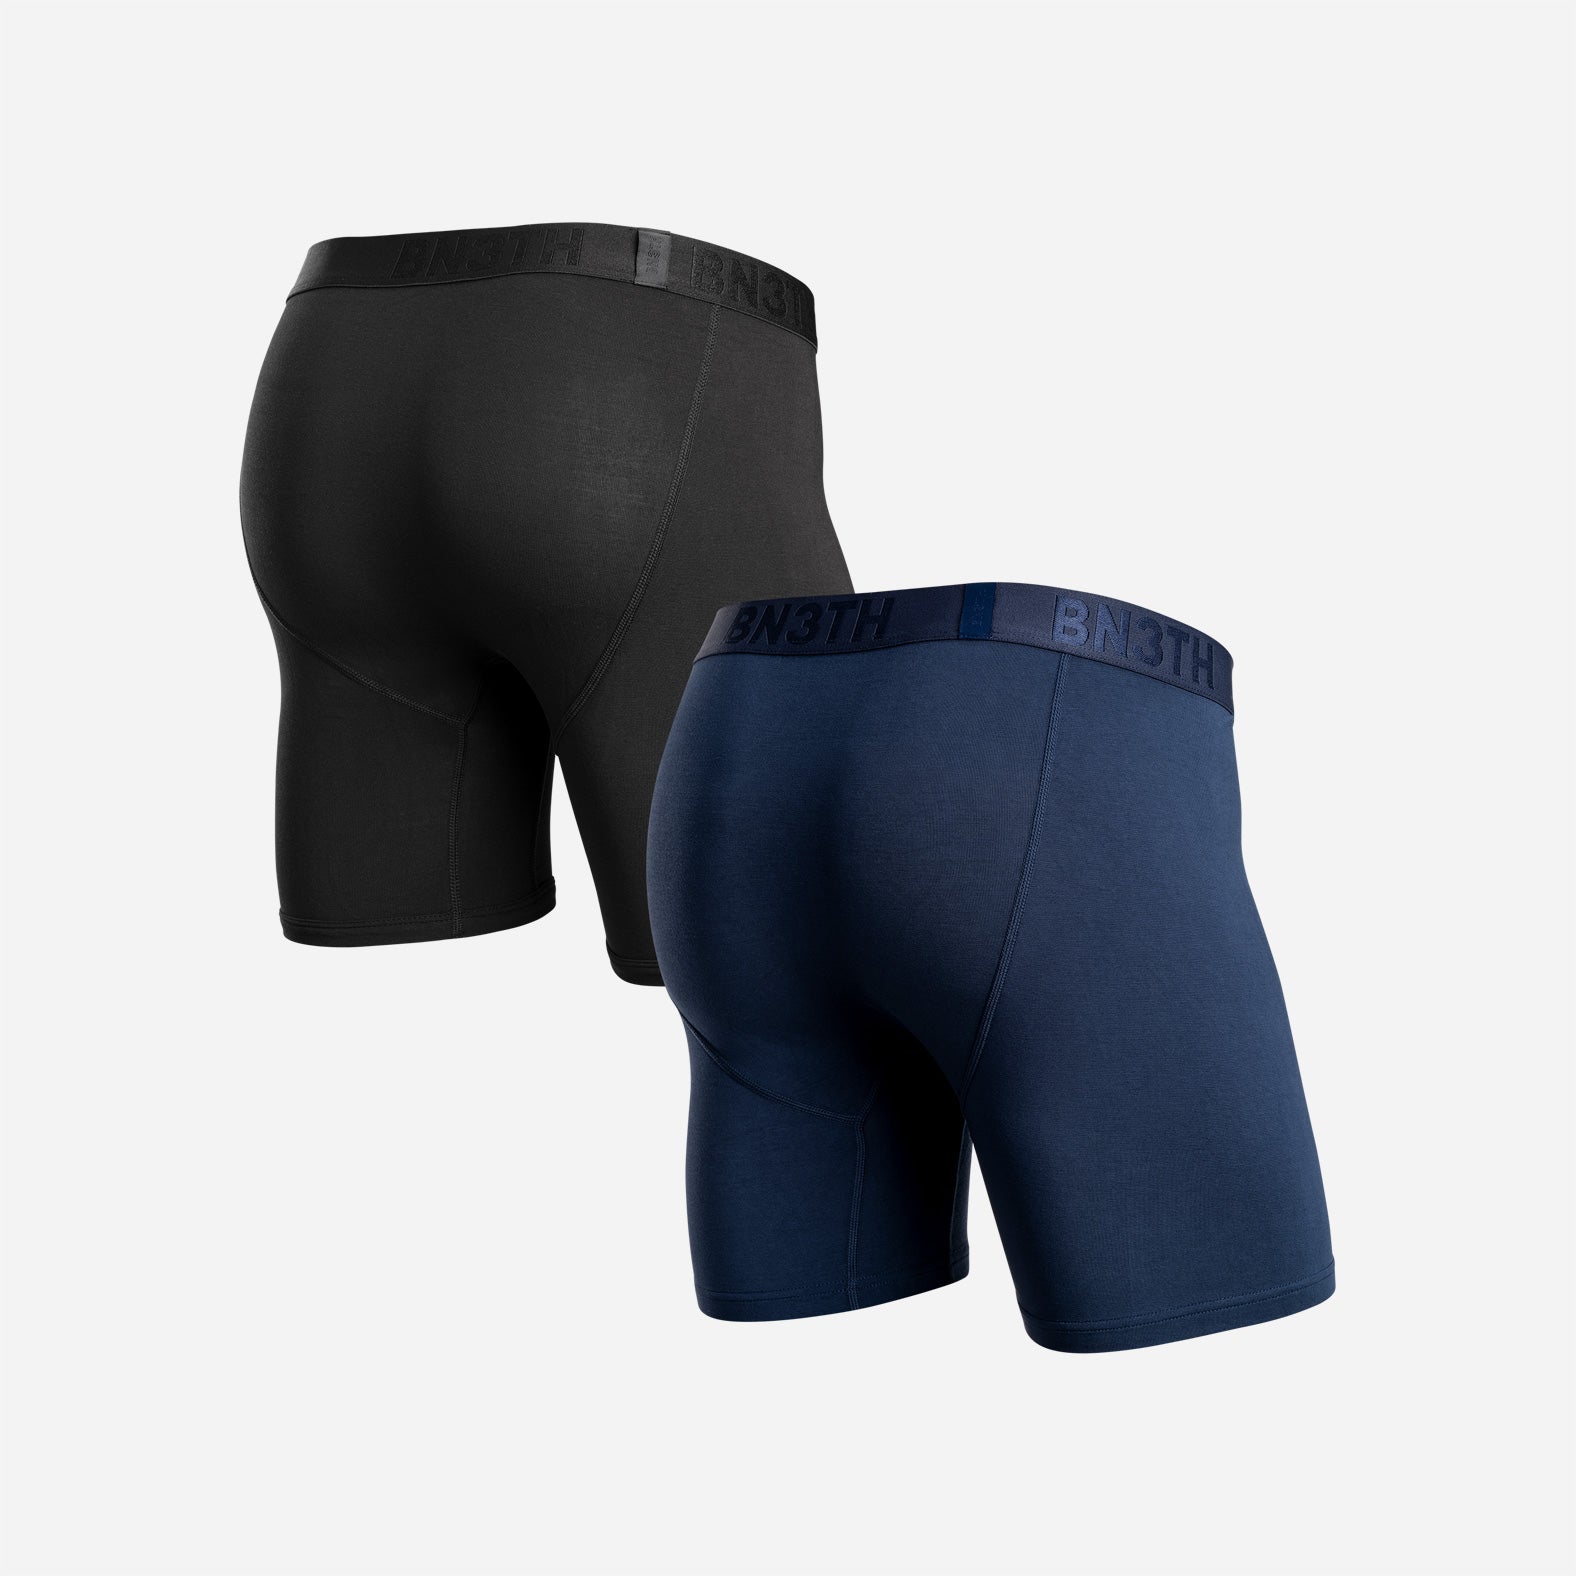 CLASSIC BOXER BRIEF: BLACK/NAVY 2 PACK